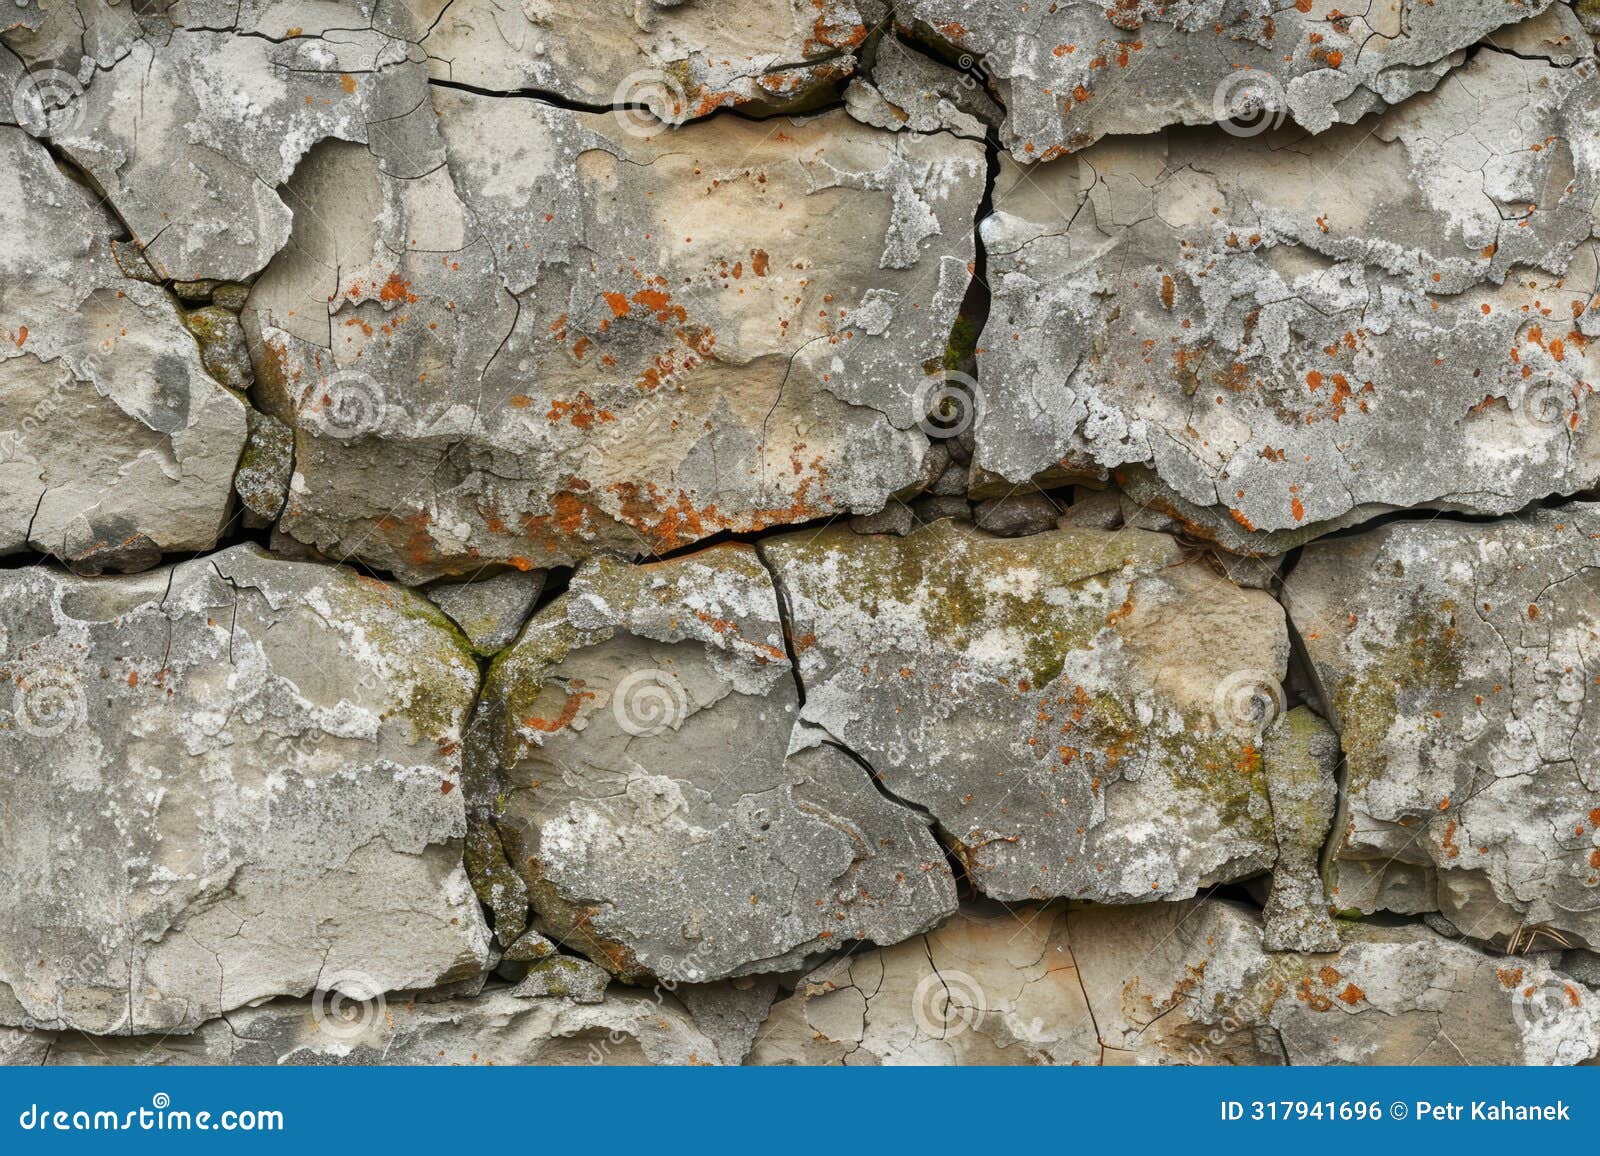 old, weathered stone surface depicting the rough texture and impact of weather over centuries. ai generated.